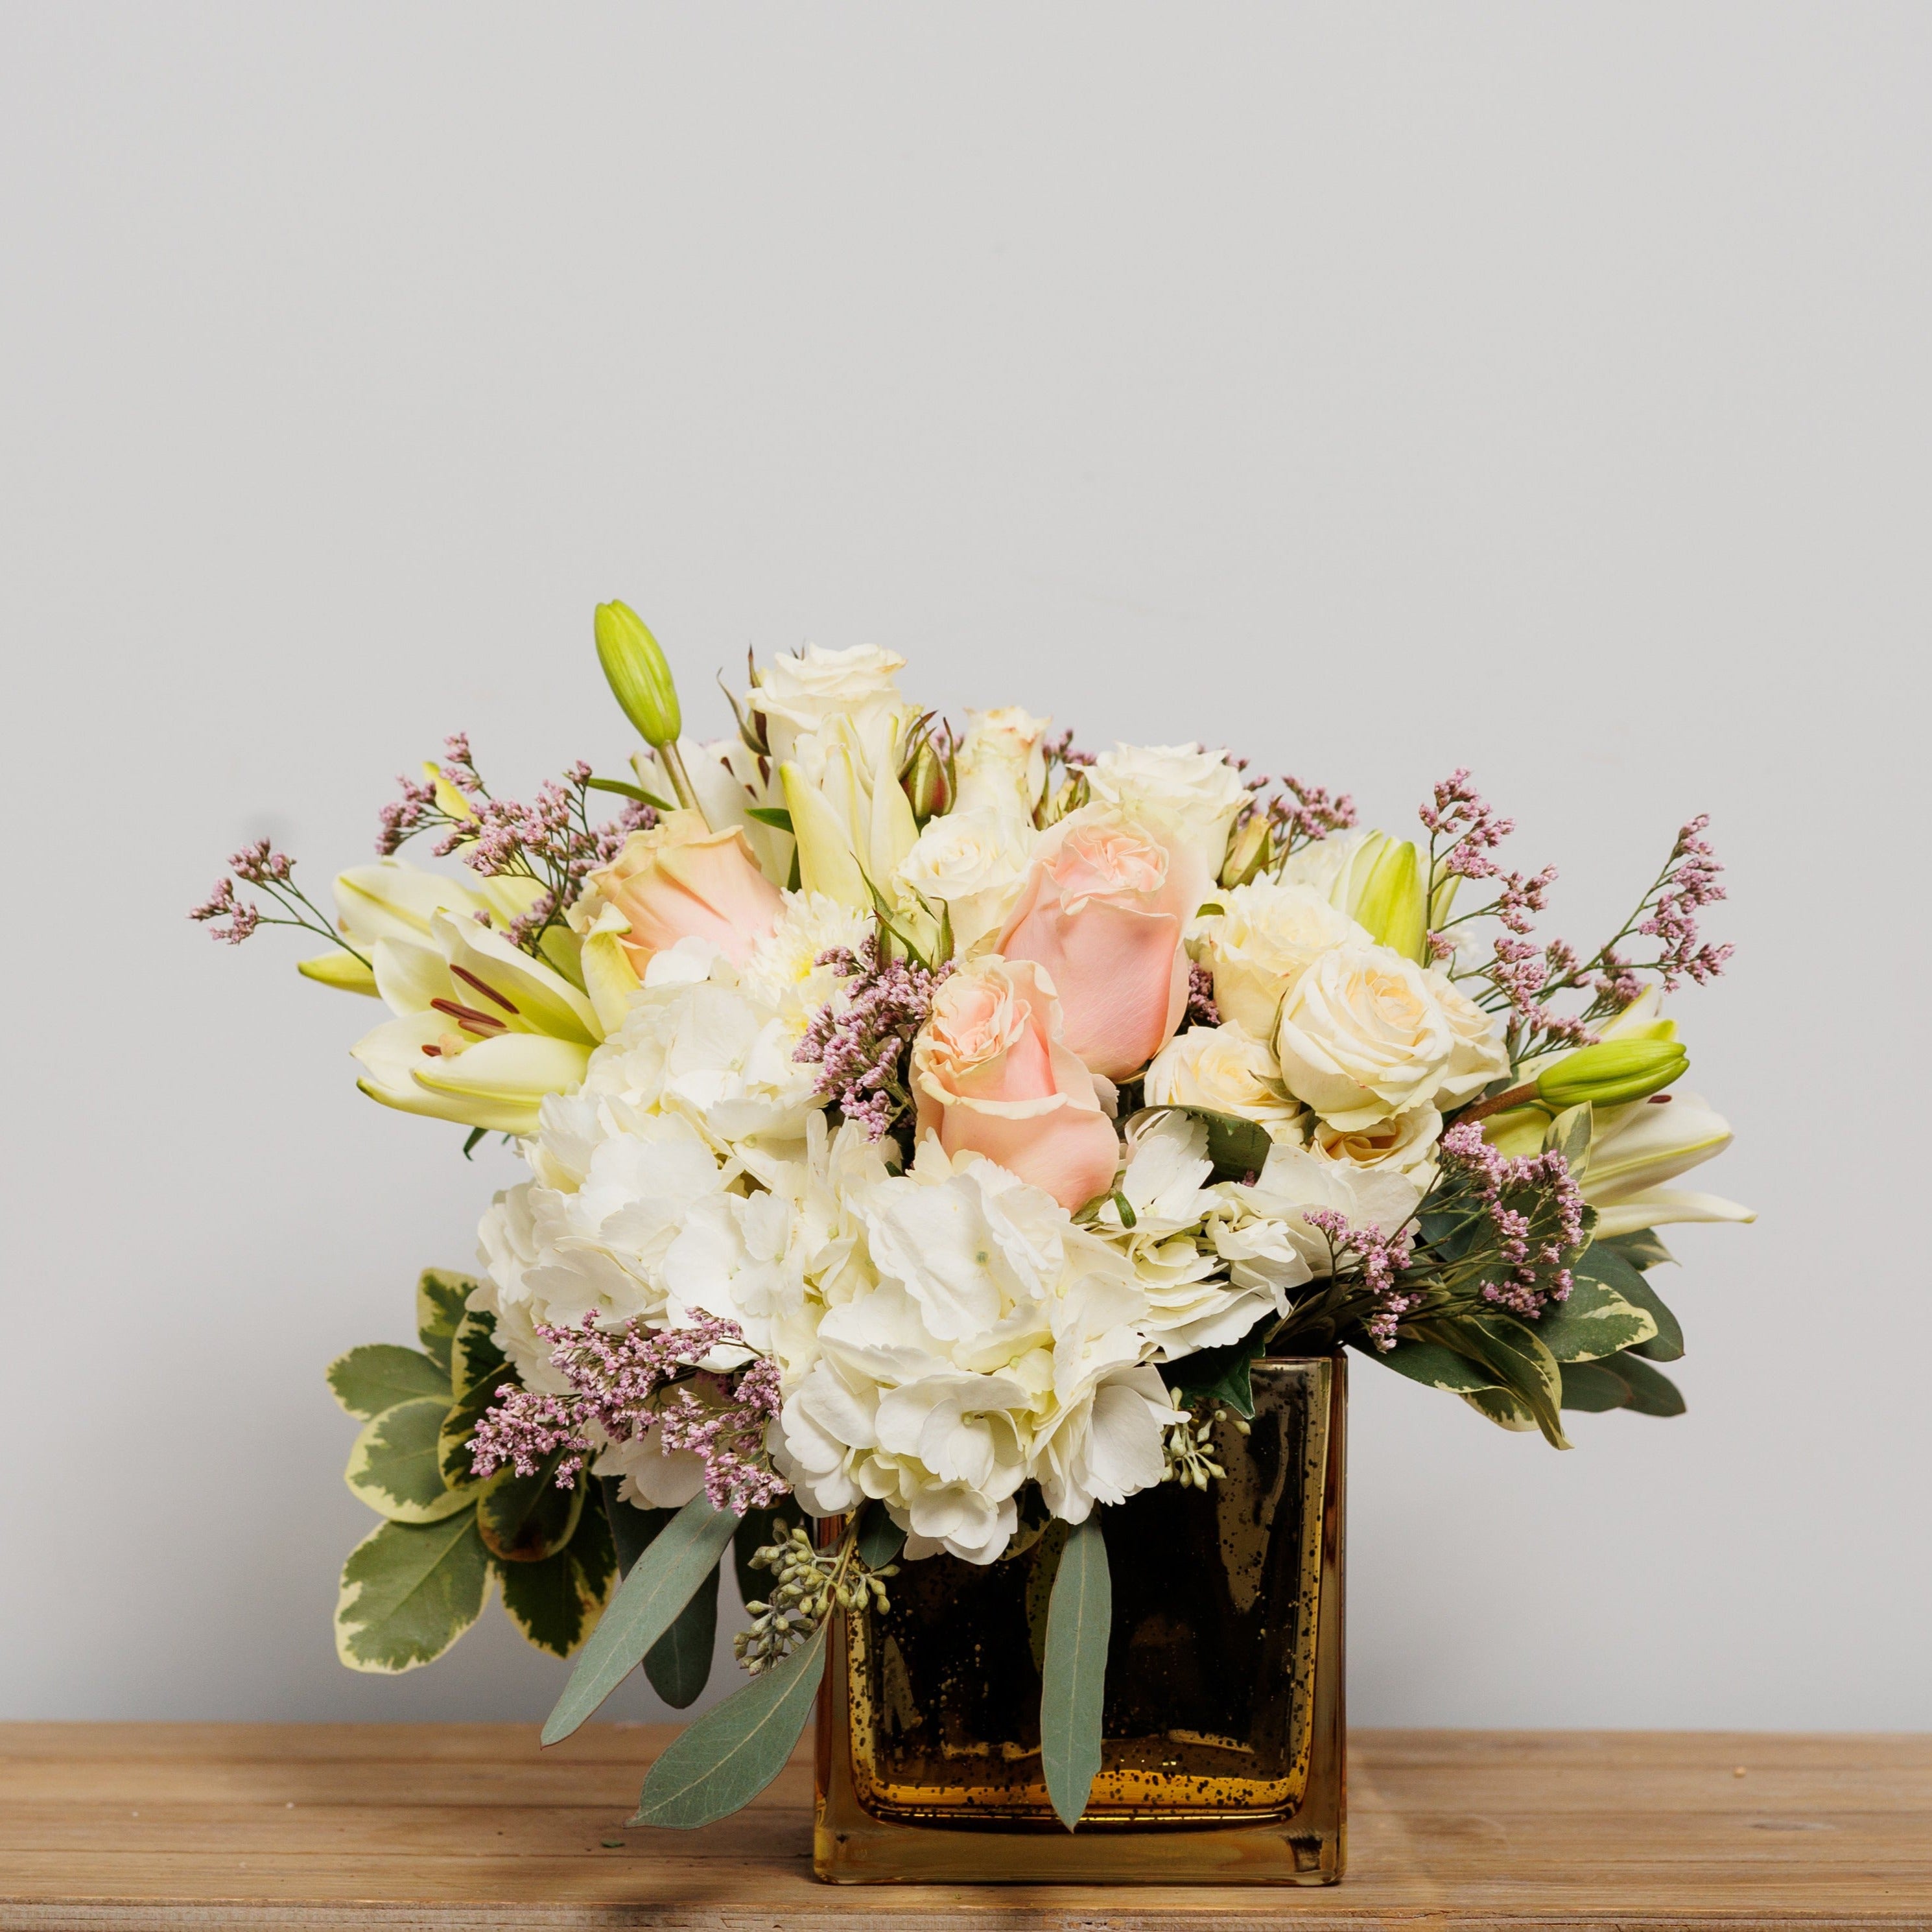 A flower arrangement with ivory and blush flowers in a golden cube.